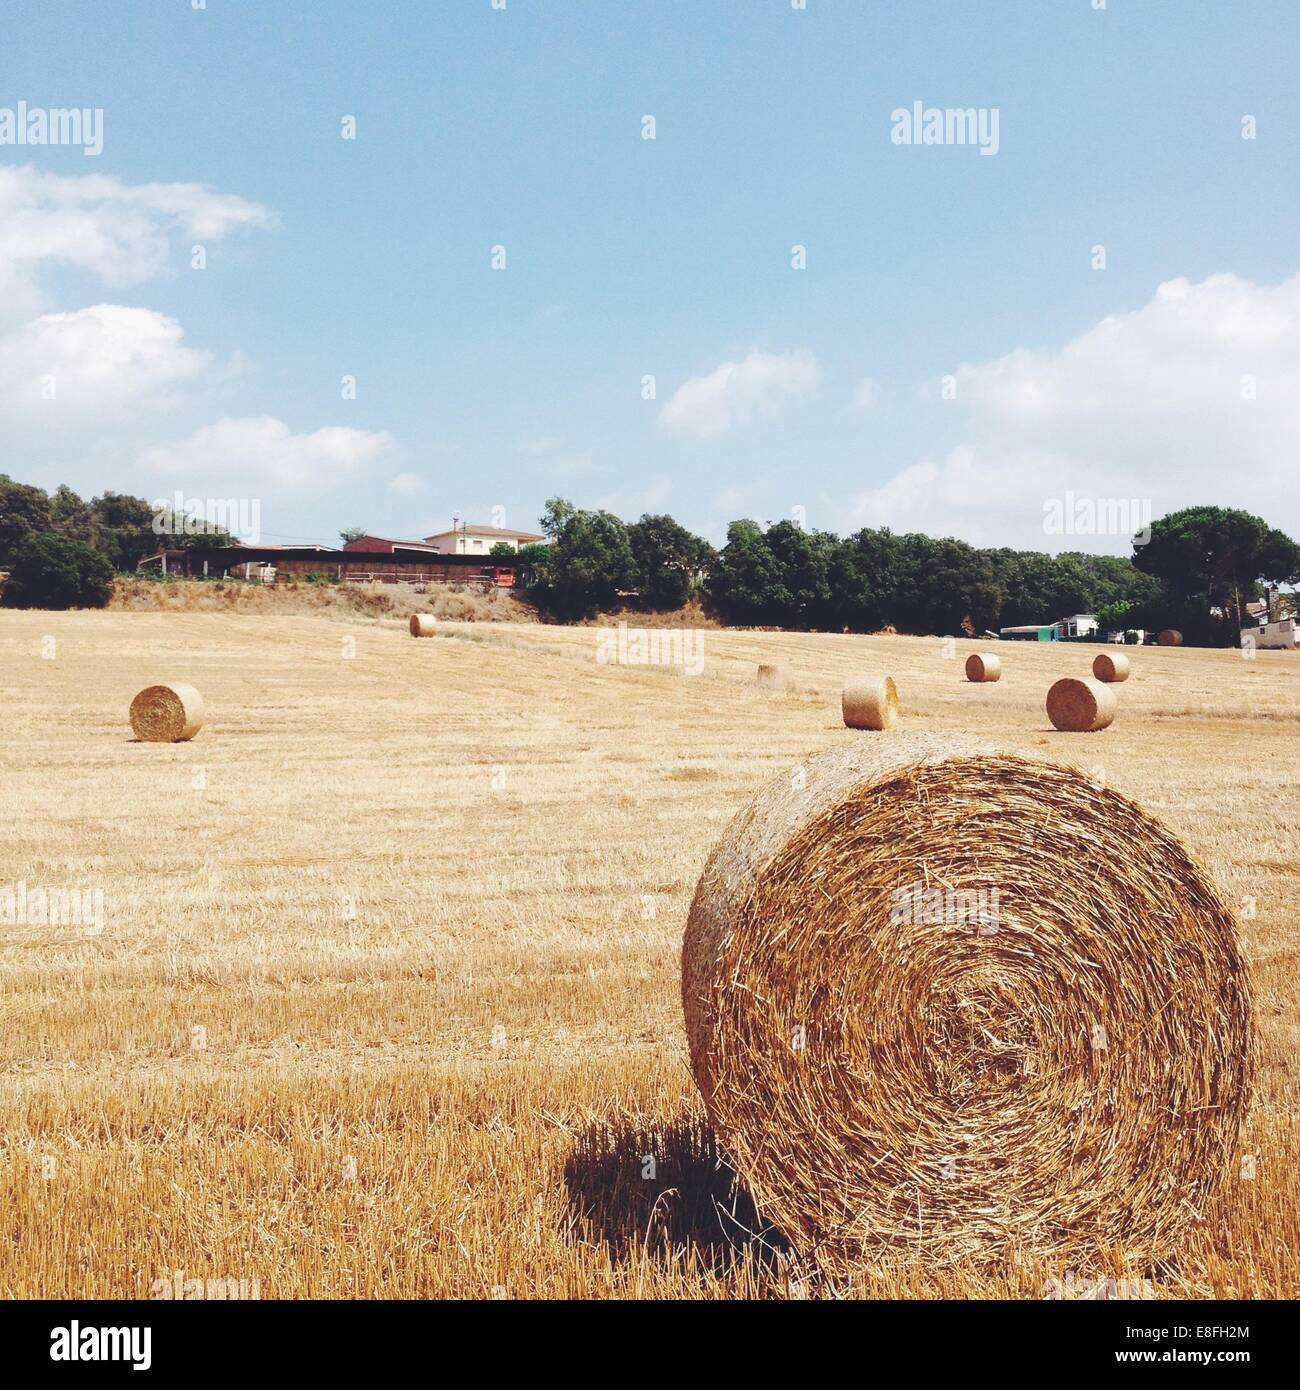 Hay bales in a field, Tordera, Maresme, Barcelona Province, Catalonia, Spain Stock Photo